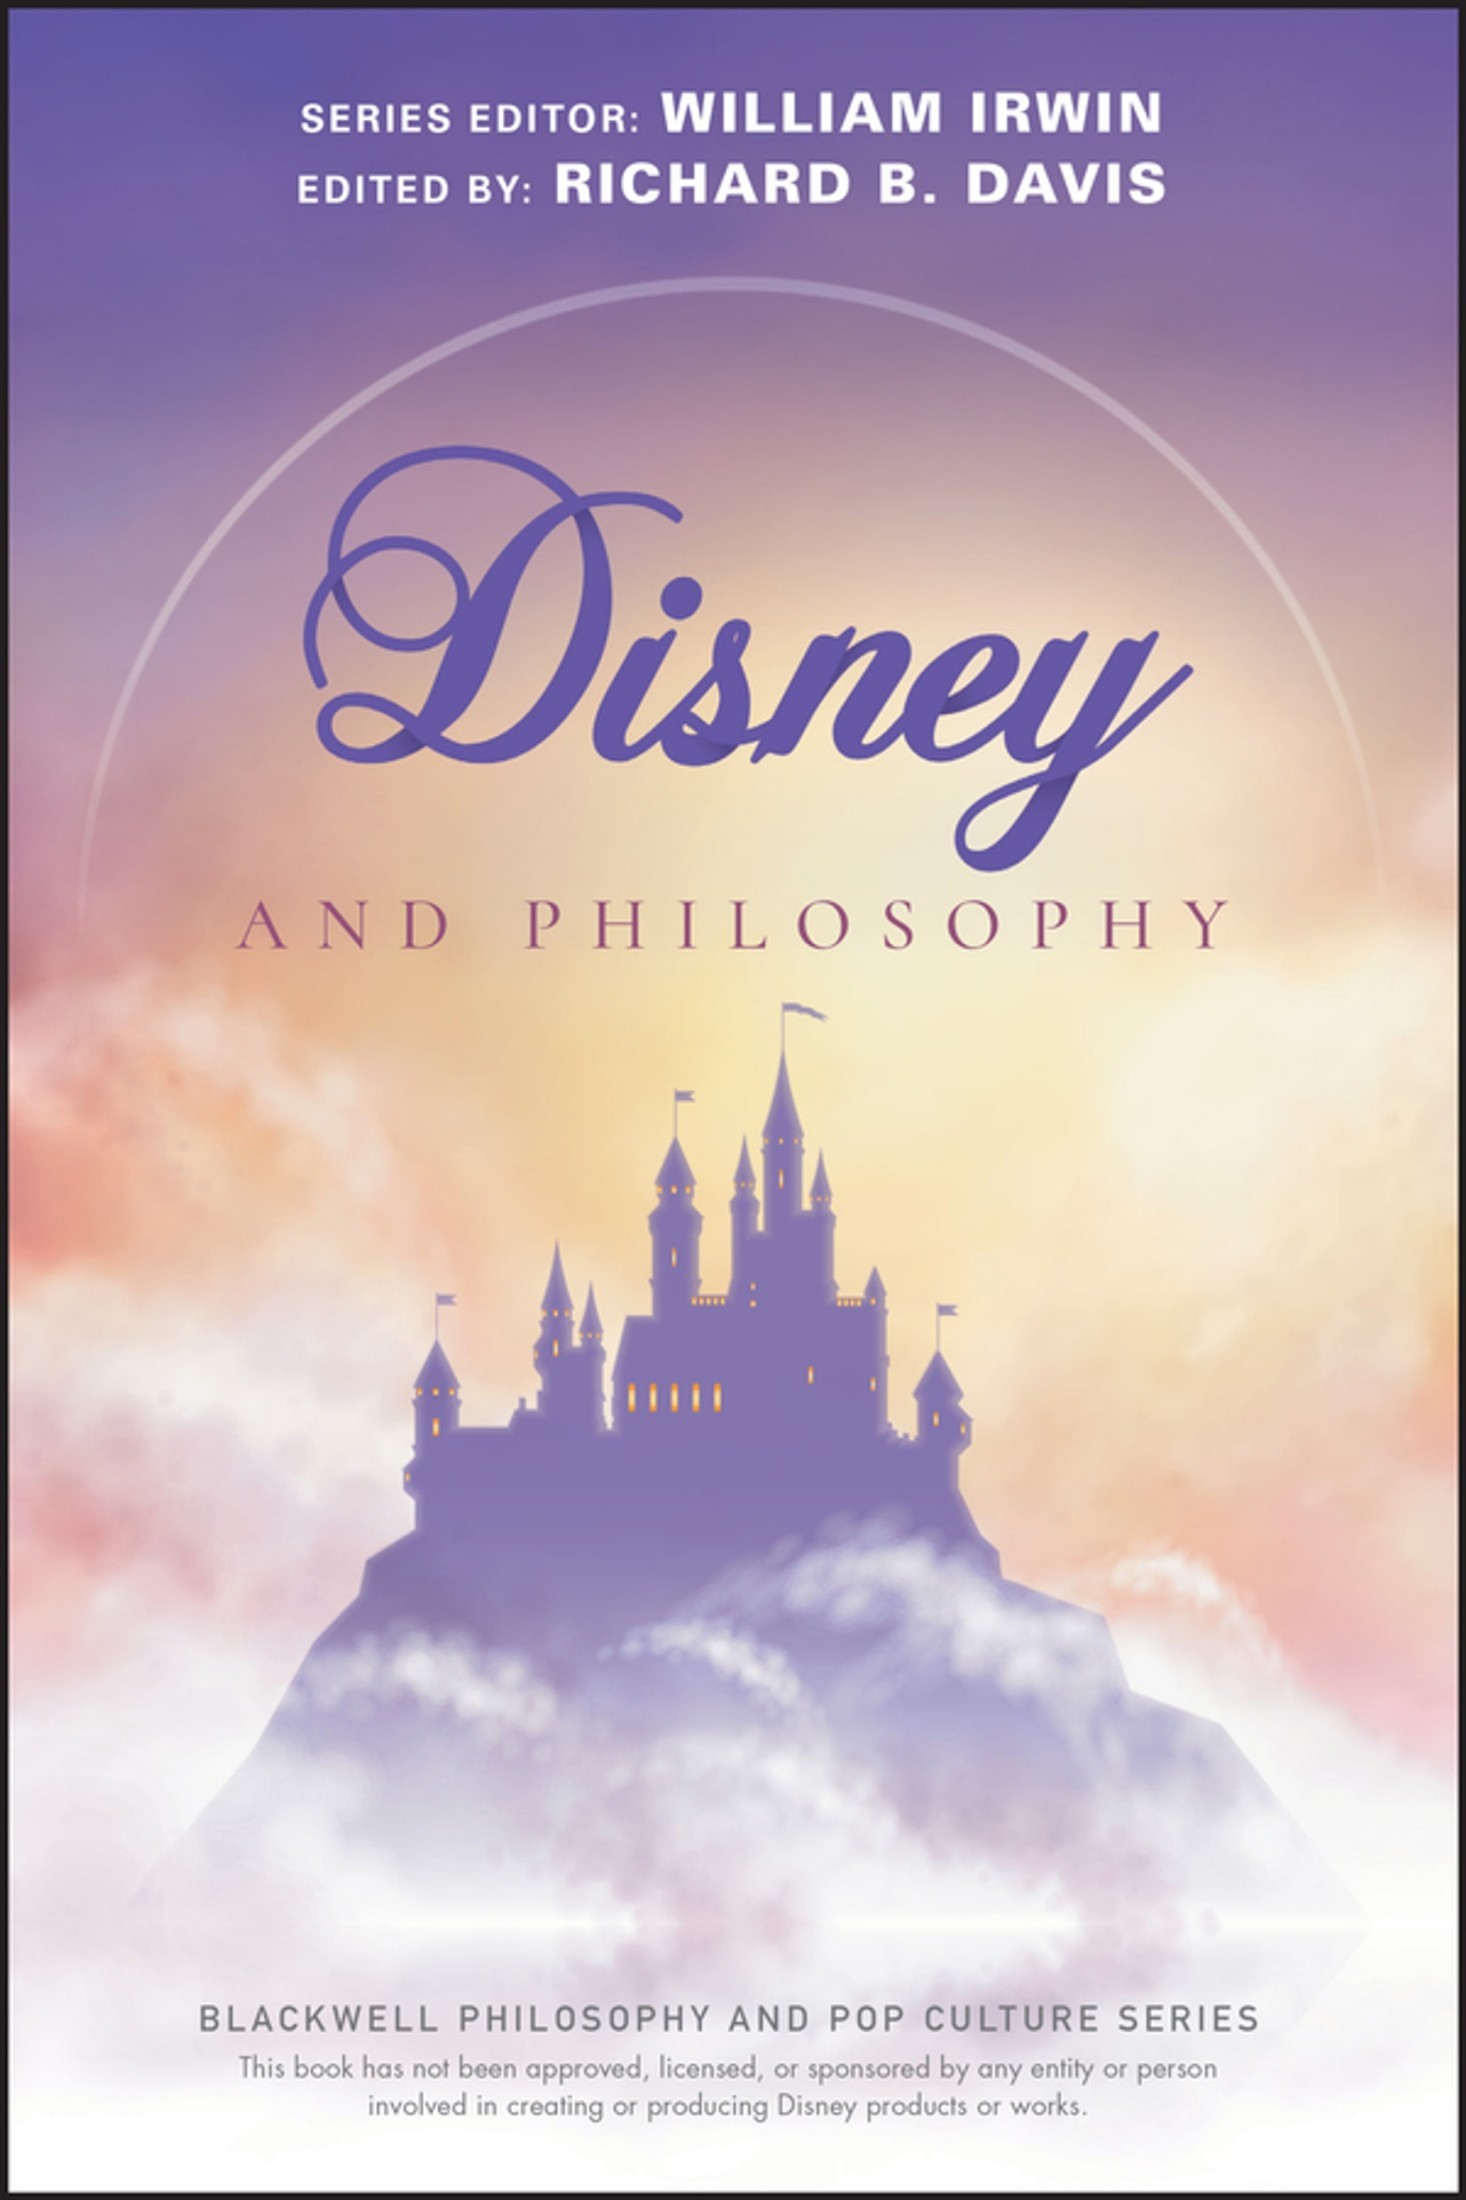 Disney and Philosophy: Truth, Trust, and a Little Bit of Pixie Dust